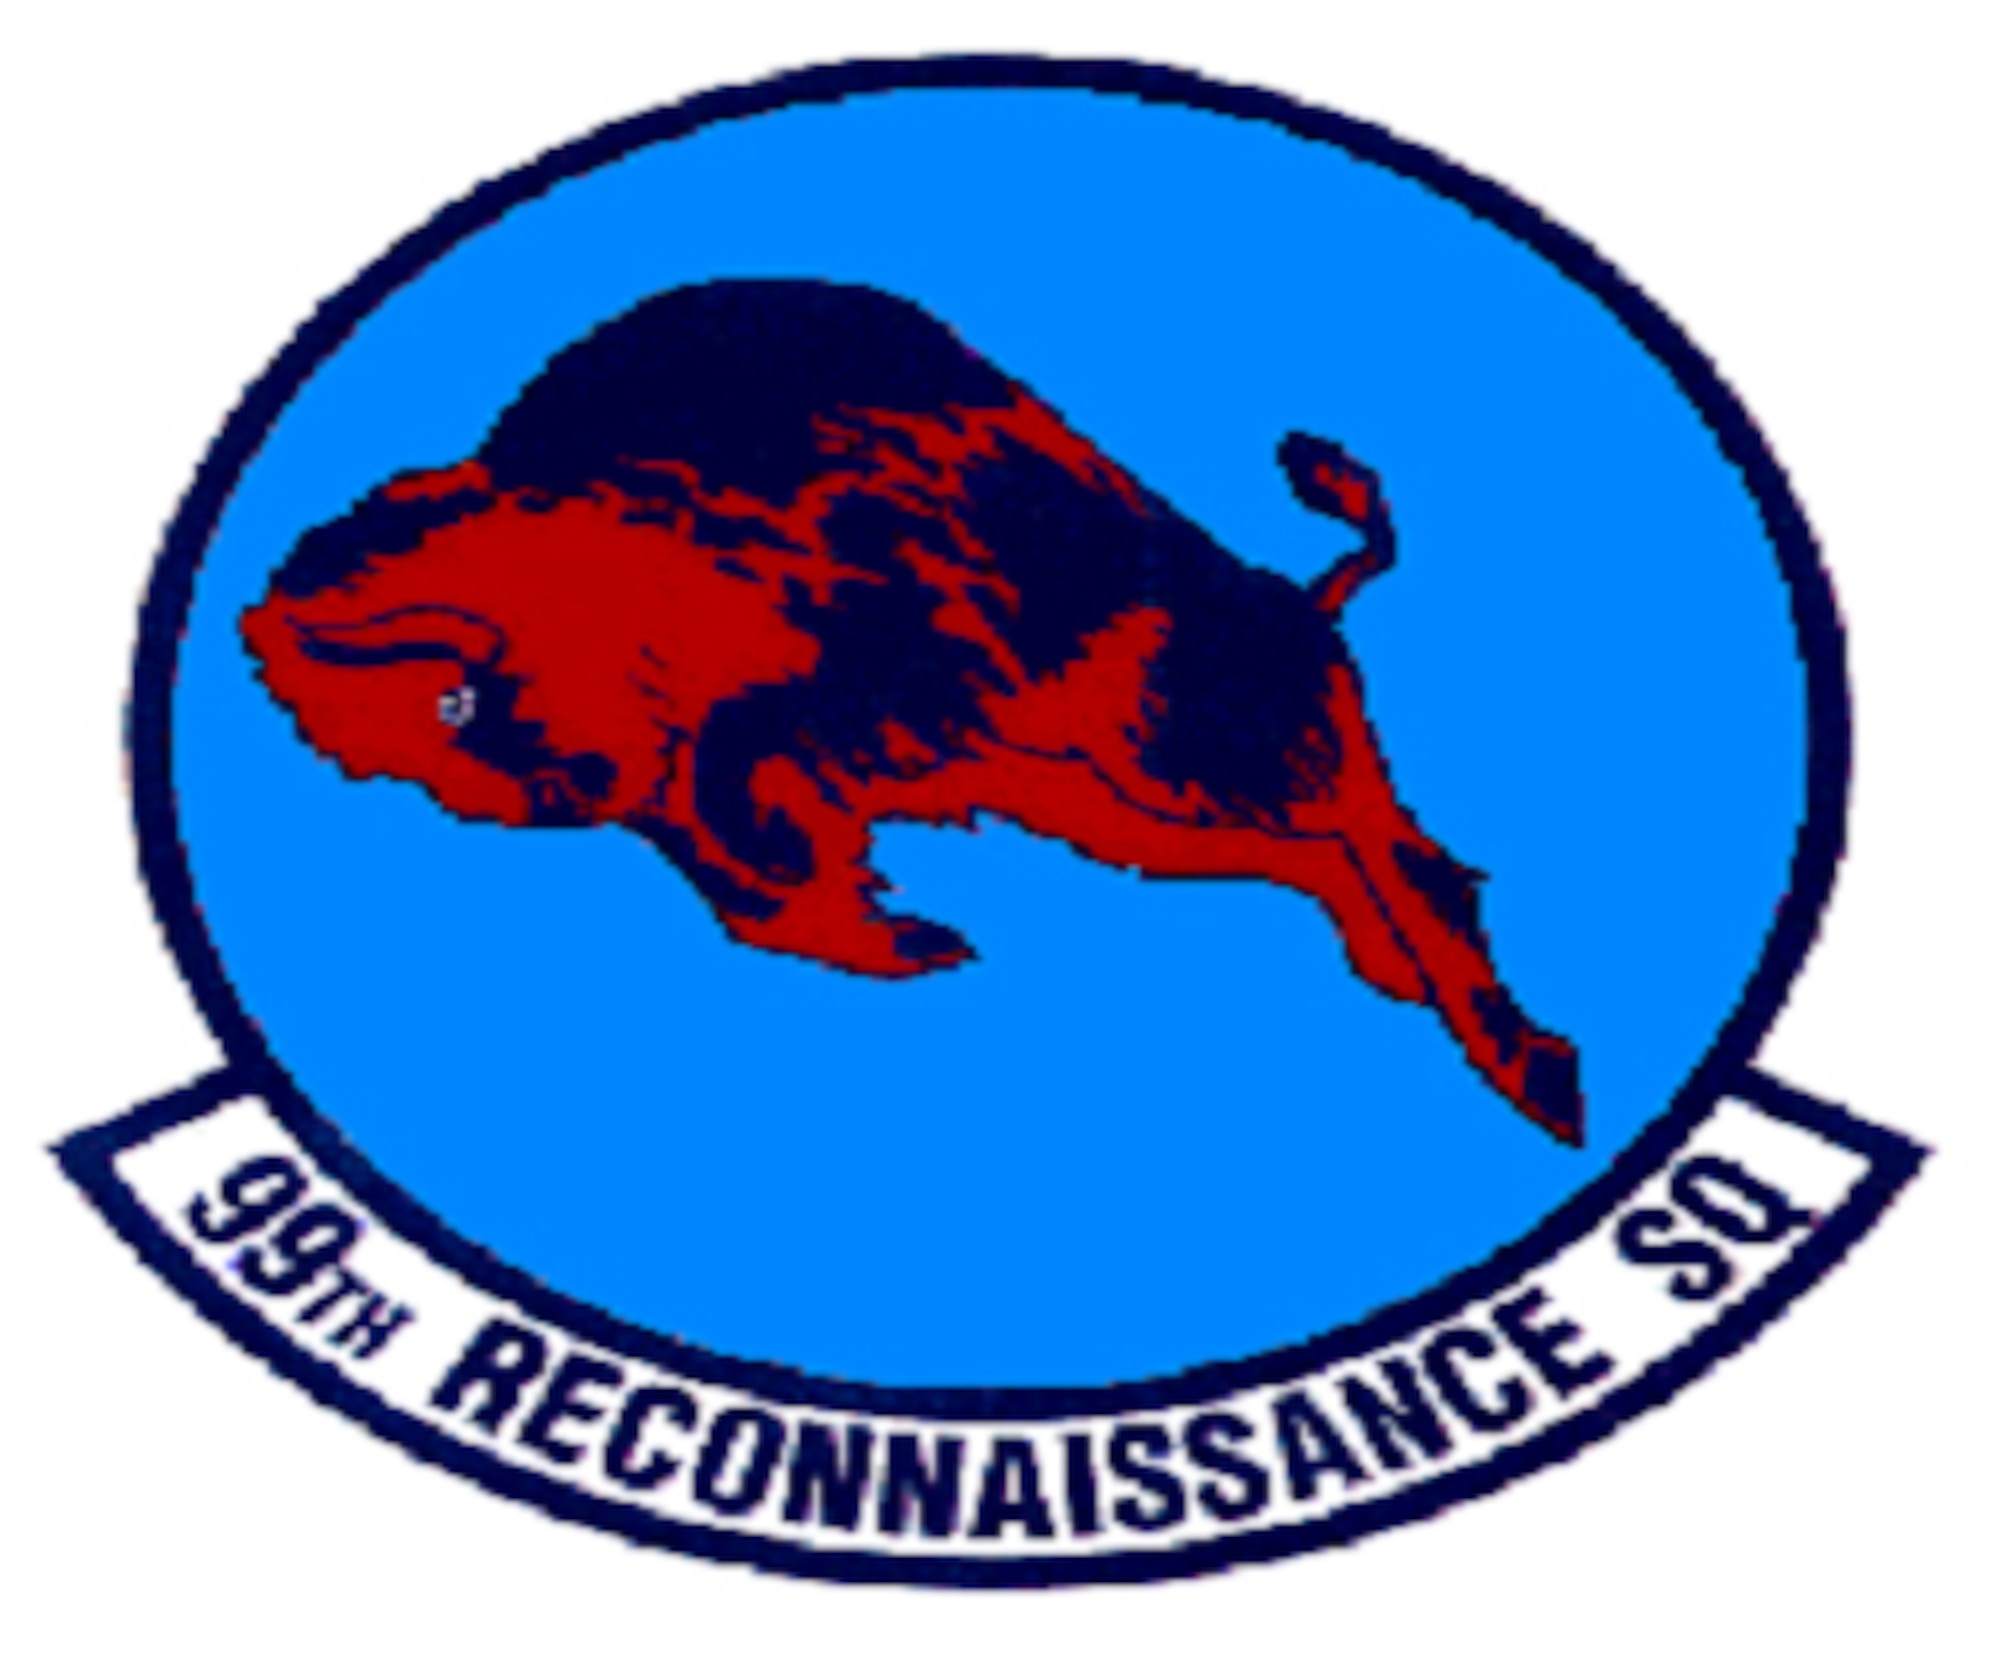 99th Reconnaissance Squadron patch. In accordance with Chapter 3 of AFI 84-105, commercial reproduction of this emblem is NOT permitted without the permission of the proponent organizational/unit commander.